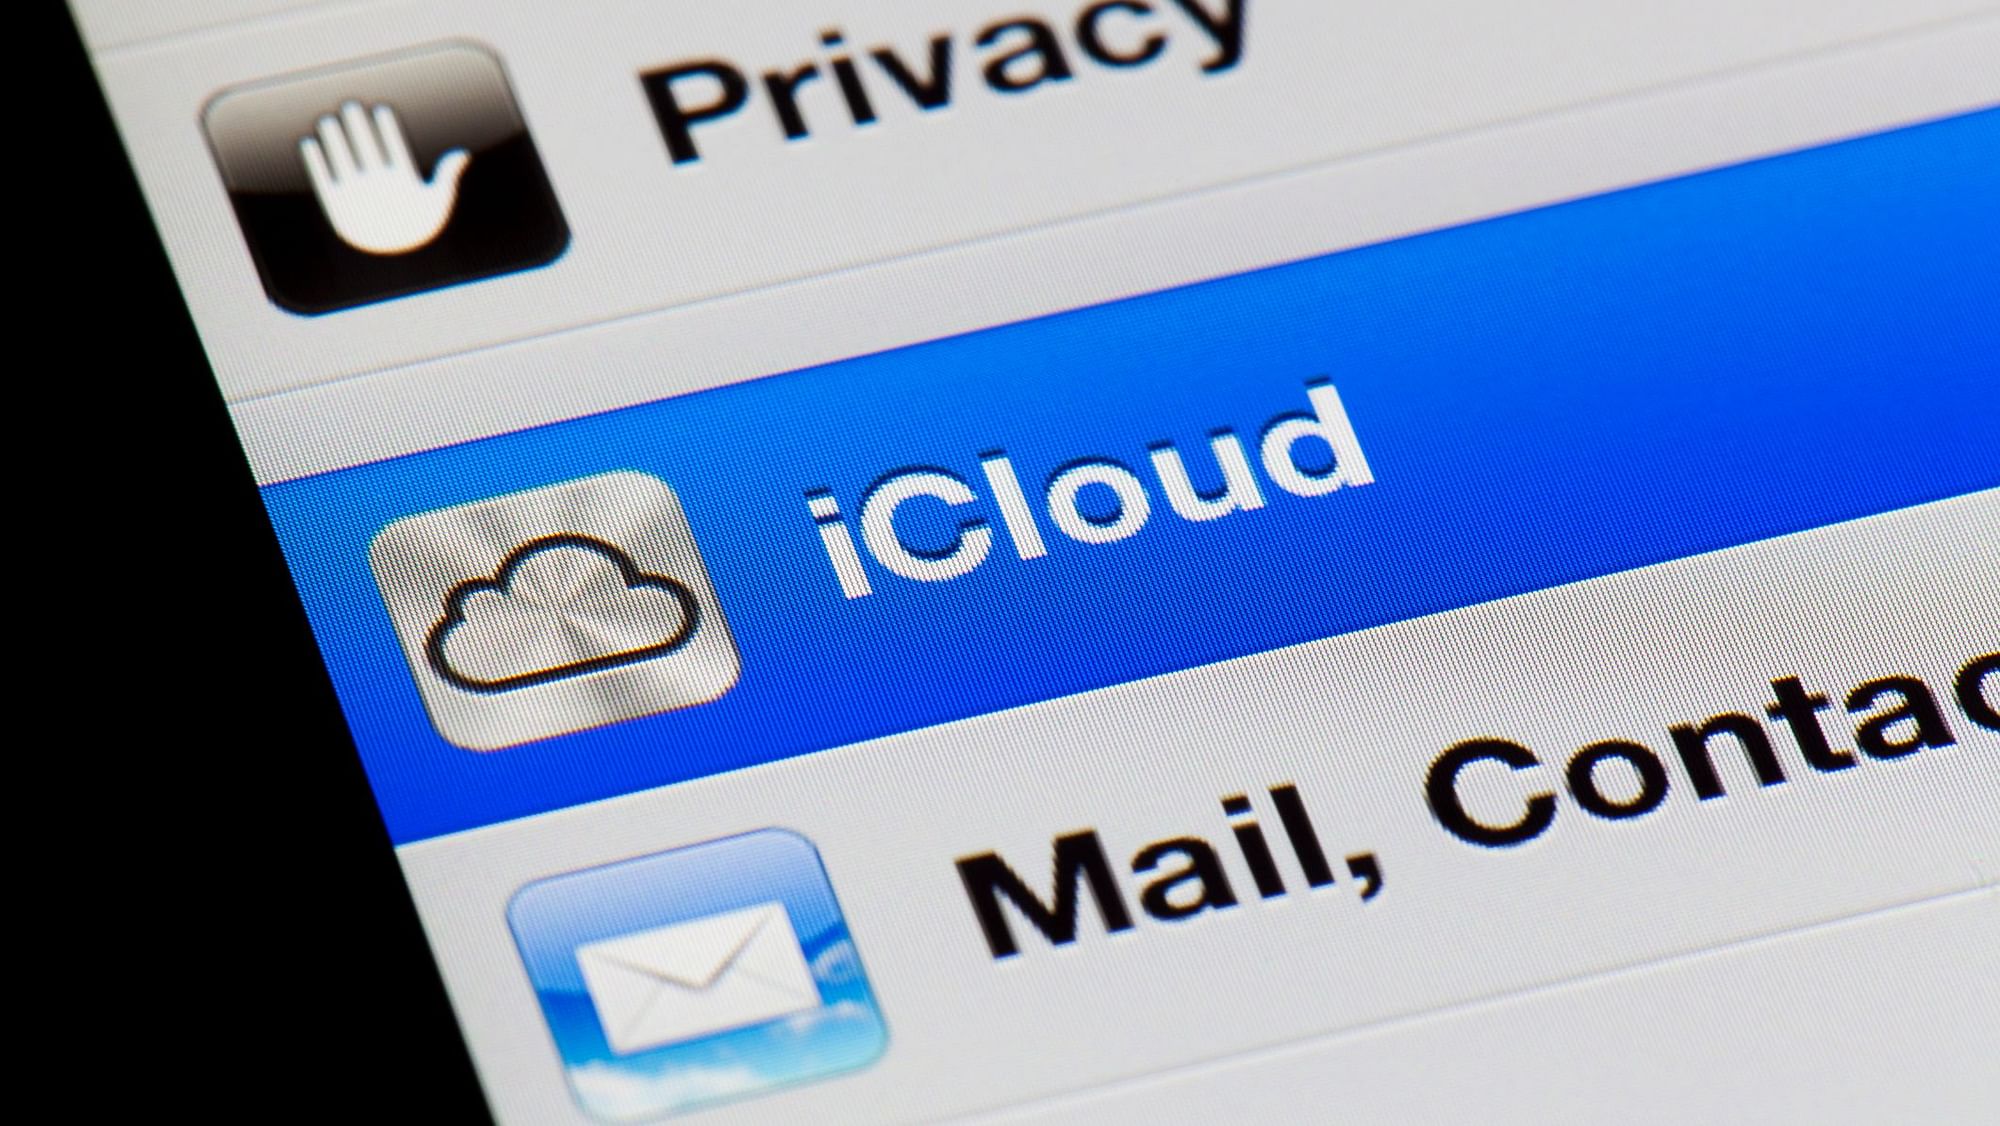 iCloud users on Apple can finally access files on their PC.